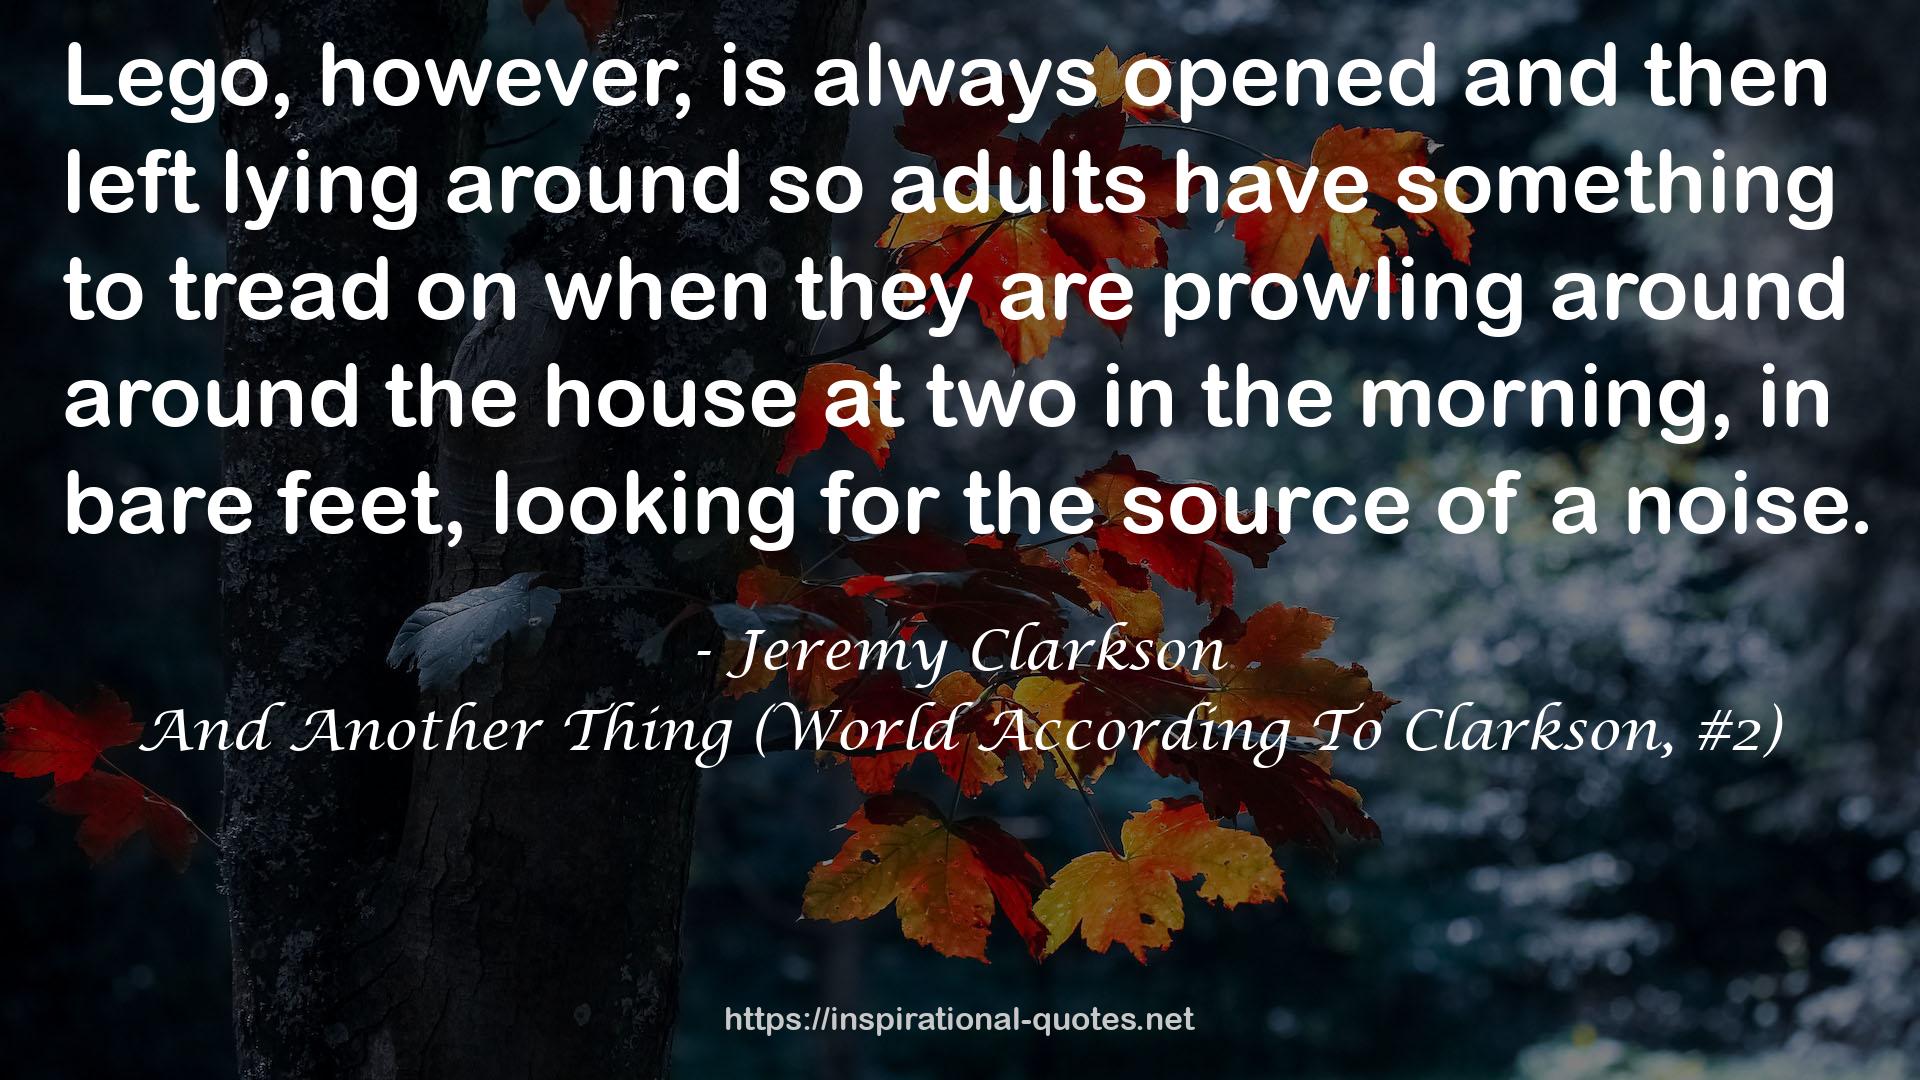 And Another Thing (World According To Clarkson, #2) QUOTES